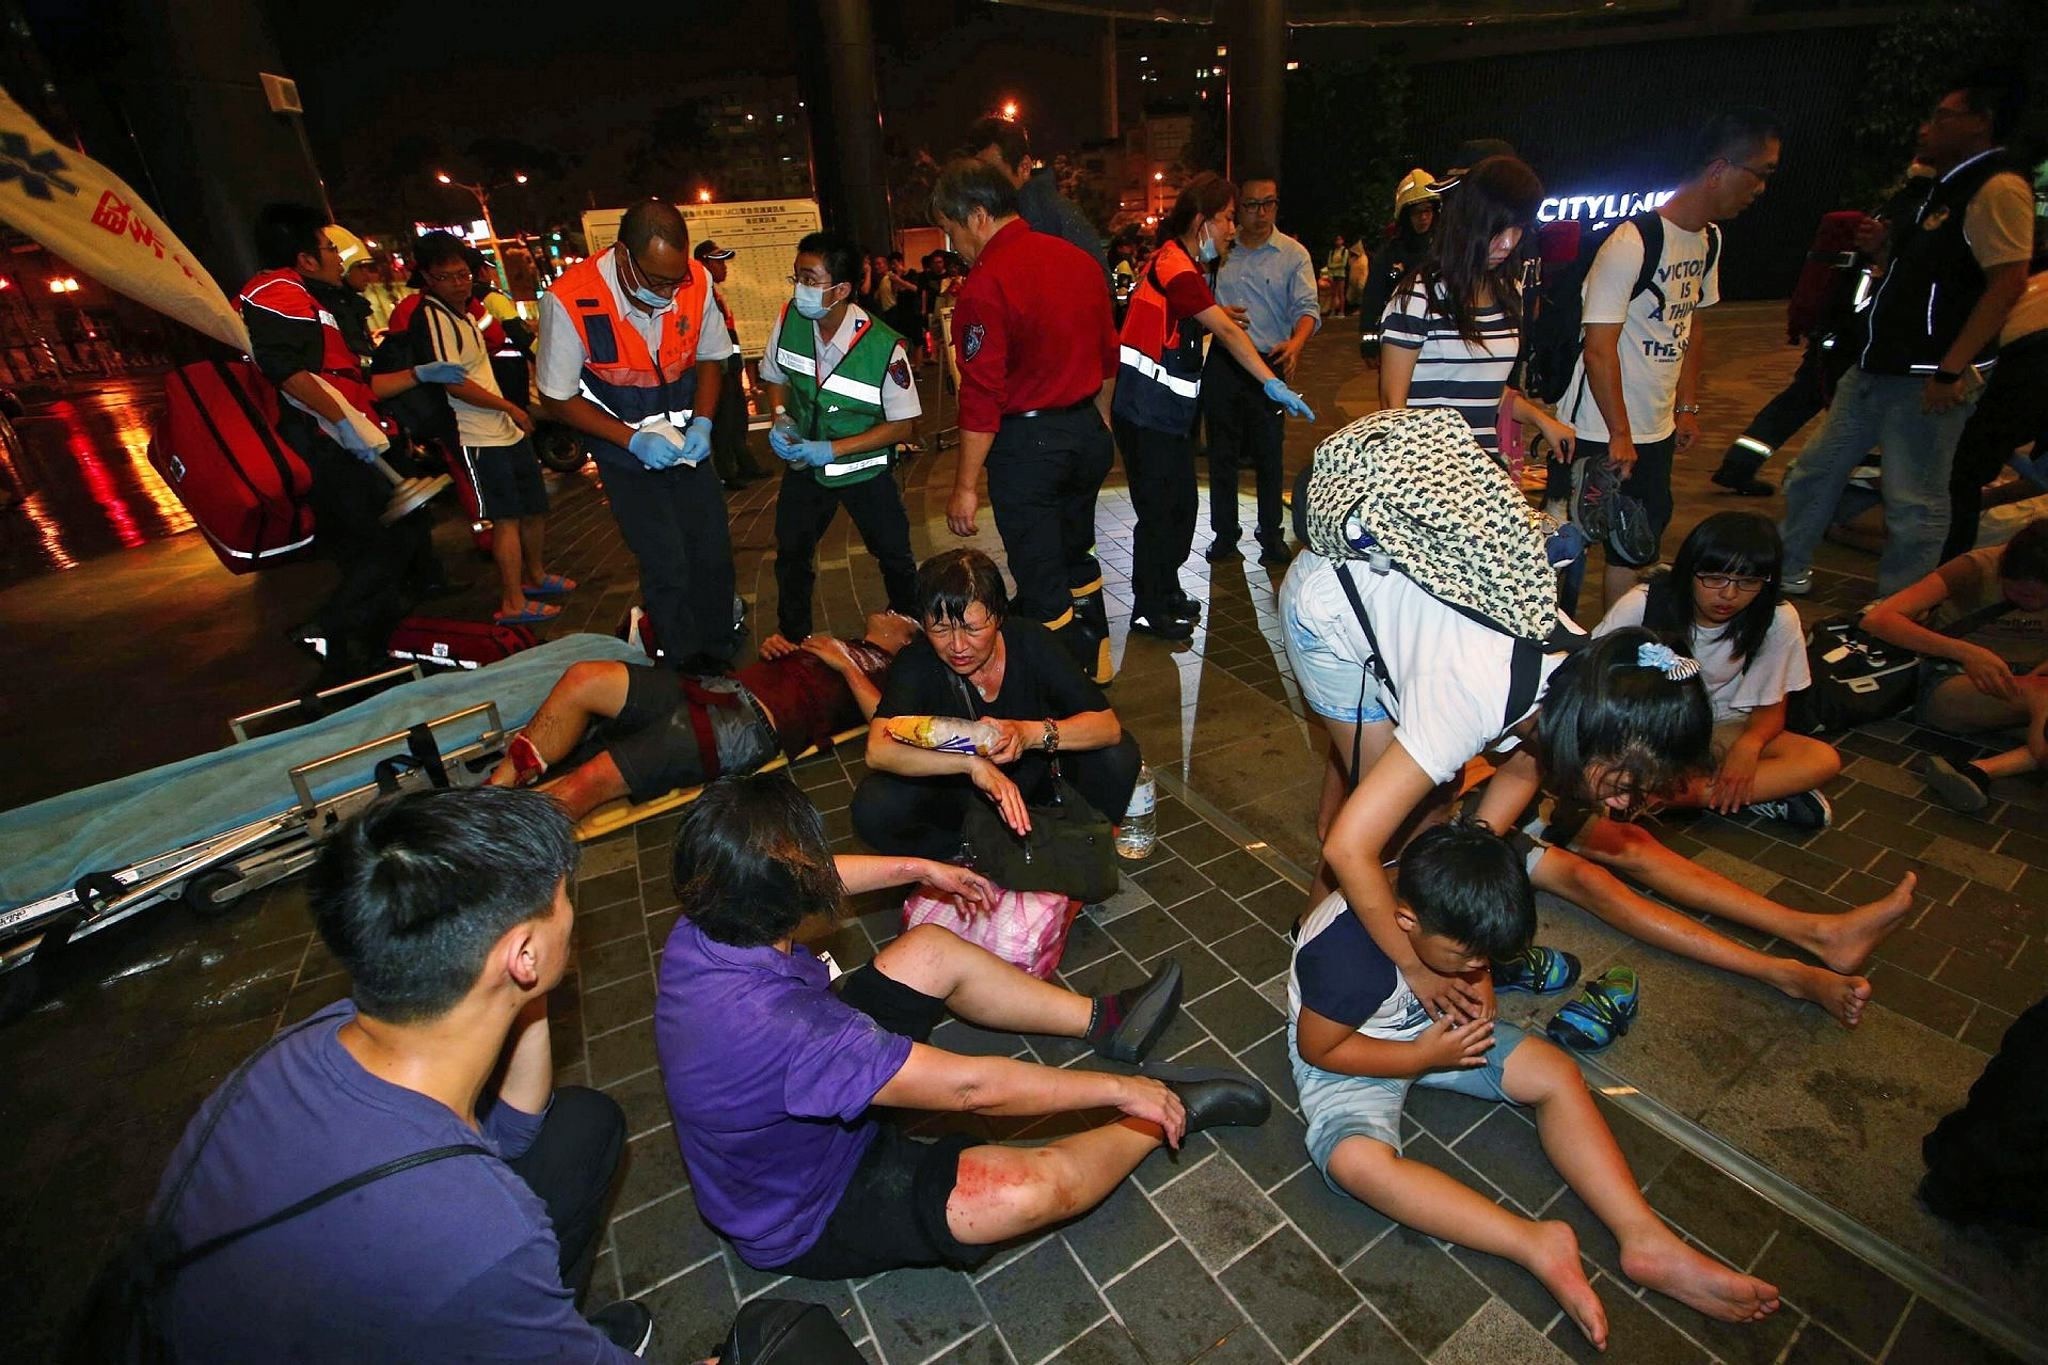 Injured people are helped by emergency rescue workers outside a station after an explosion on a passenger train in Taipei, Taiwan, Thursday, July 7, 2016. (AP Photo)